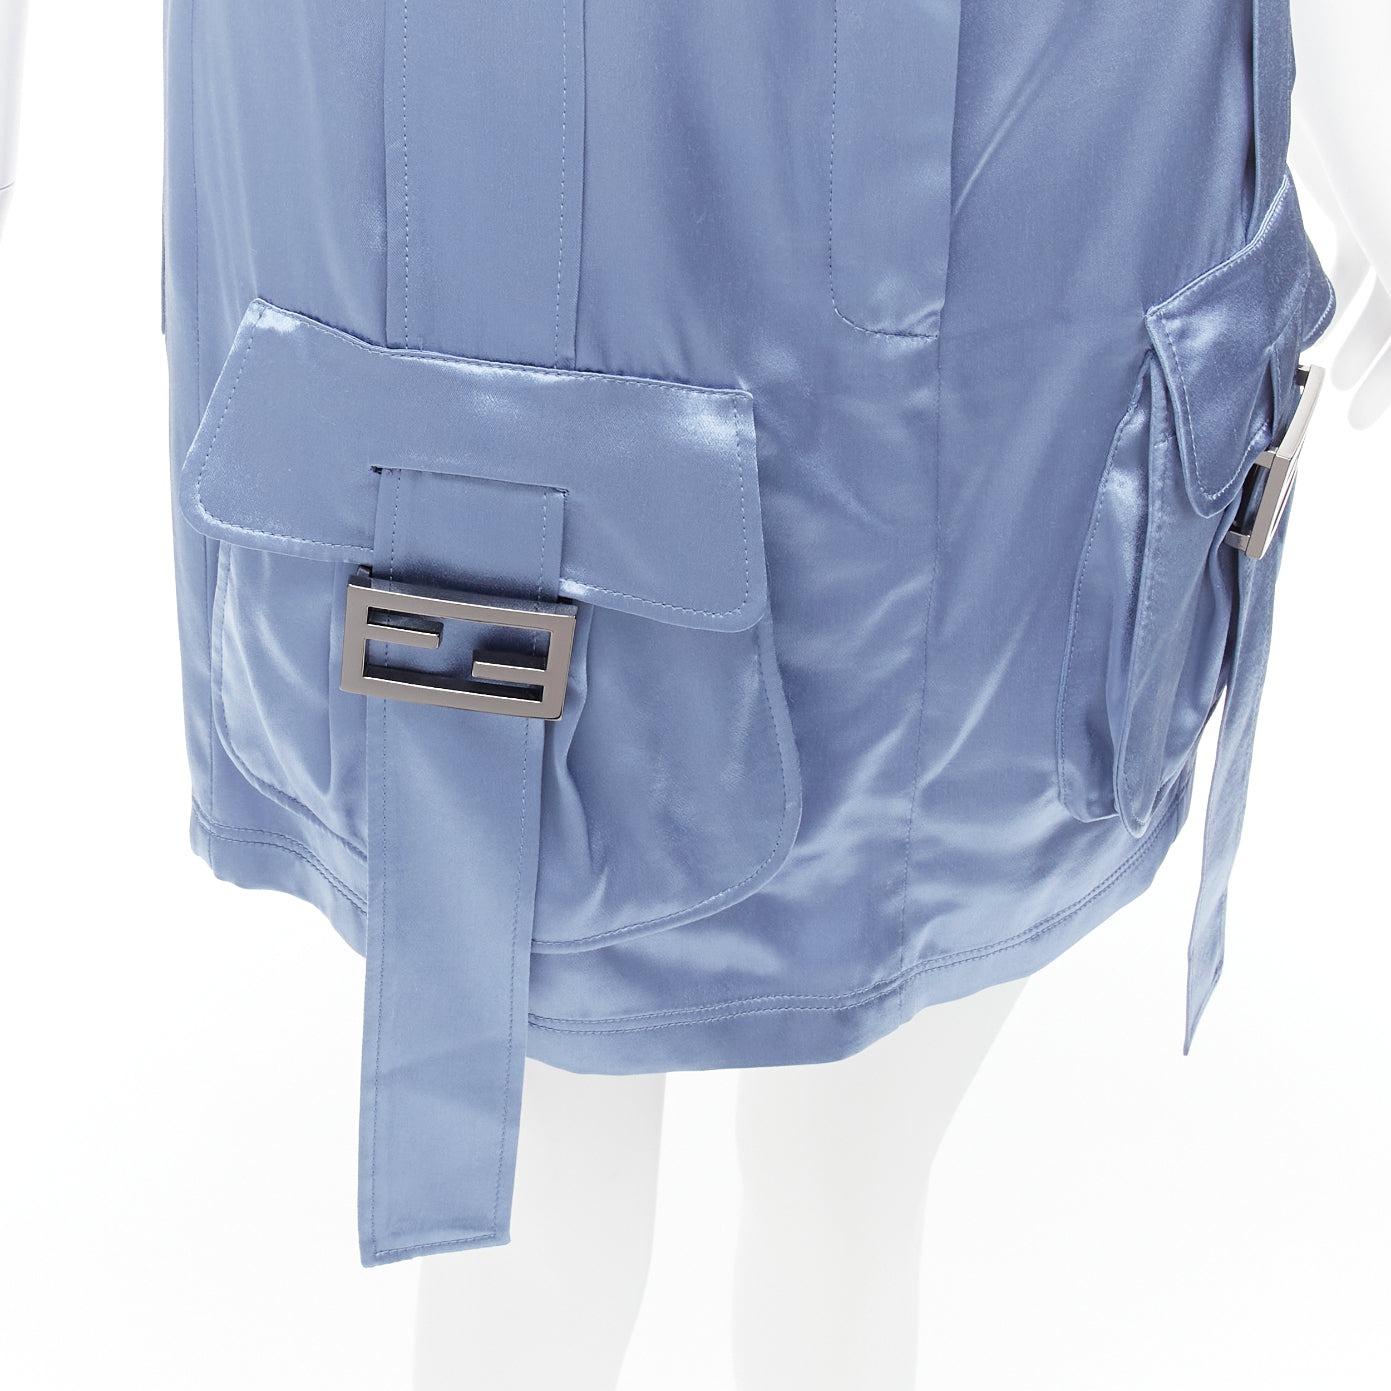 FENDI 2023 Runway Baguette blue satin FF buckle cargo pocket skirt IT38 XS
Reference: TGAS/D00796
Brand: Fendi
Designer: Kim Jones
Collection: AW 2023 - Runway
Material: Viscose
Color: Blue
Pattern: Solid
Closure: Zip Fly
Lining: Blue Fabric
Extra